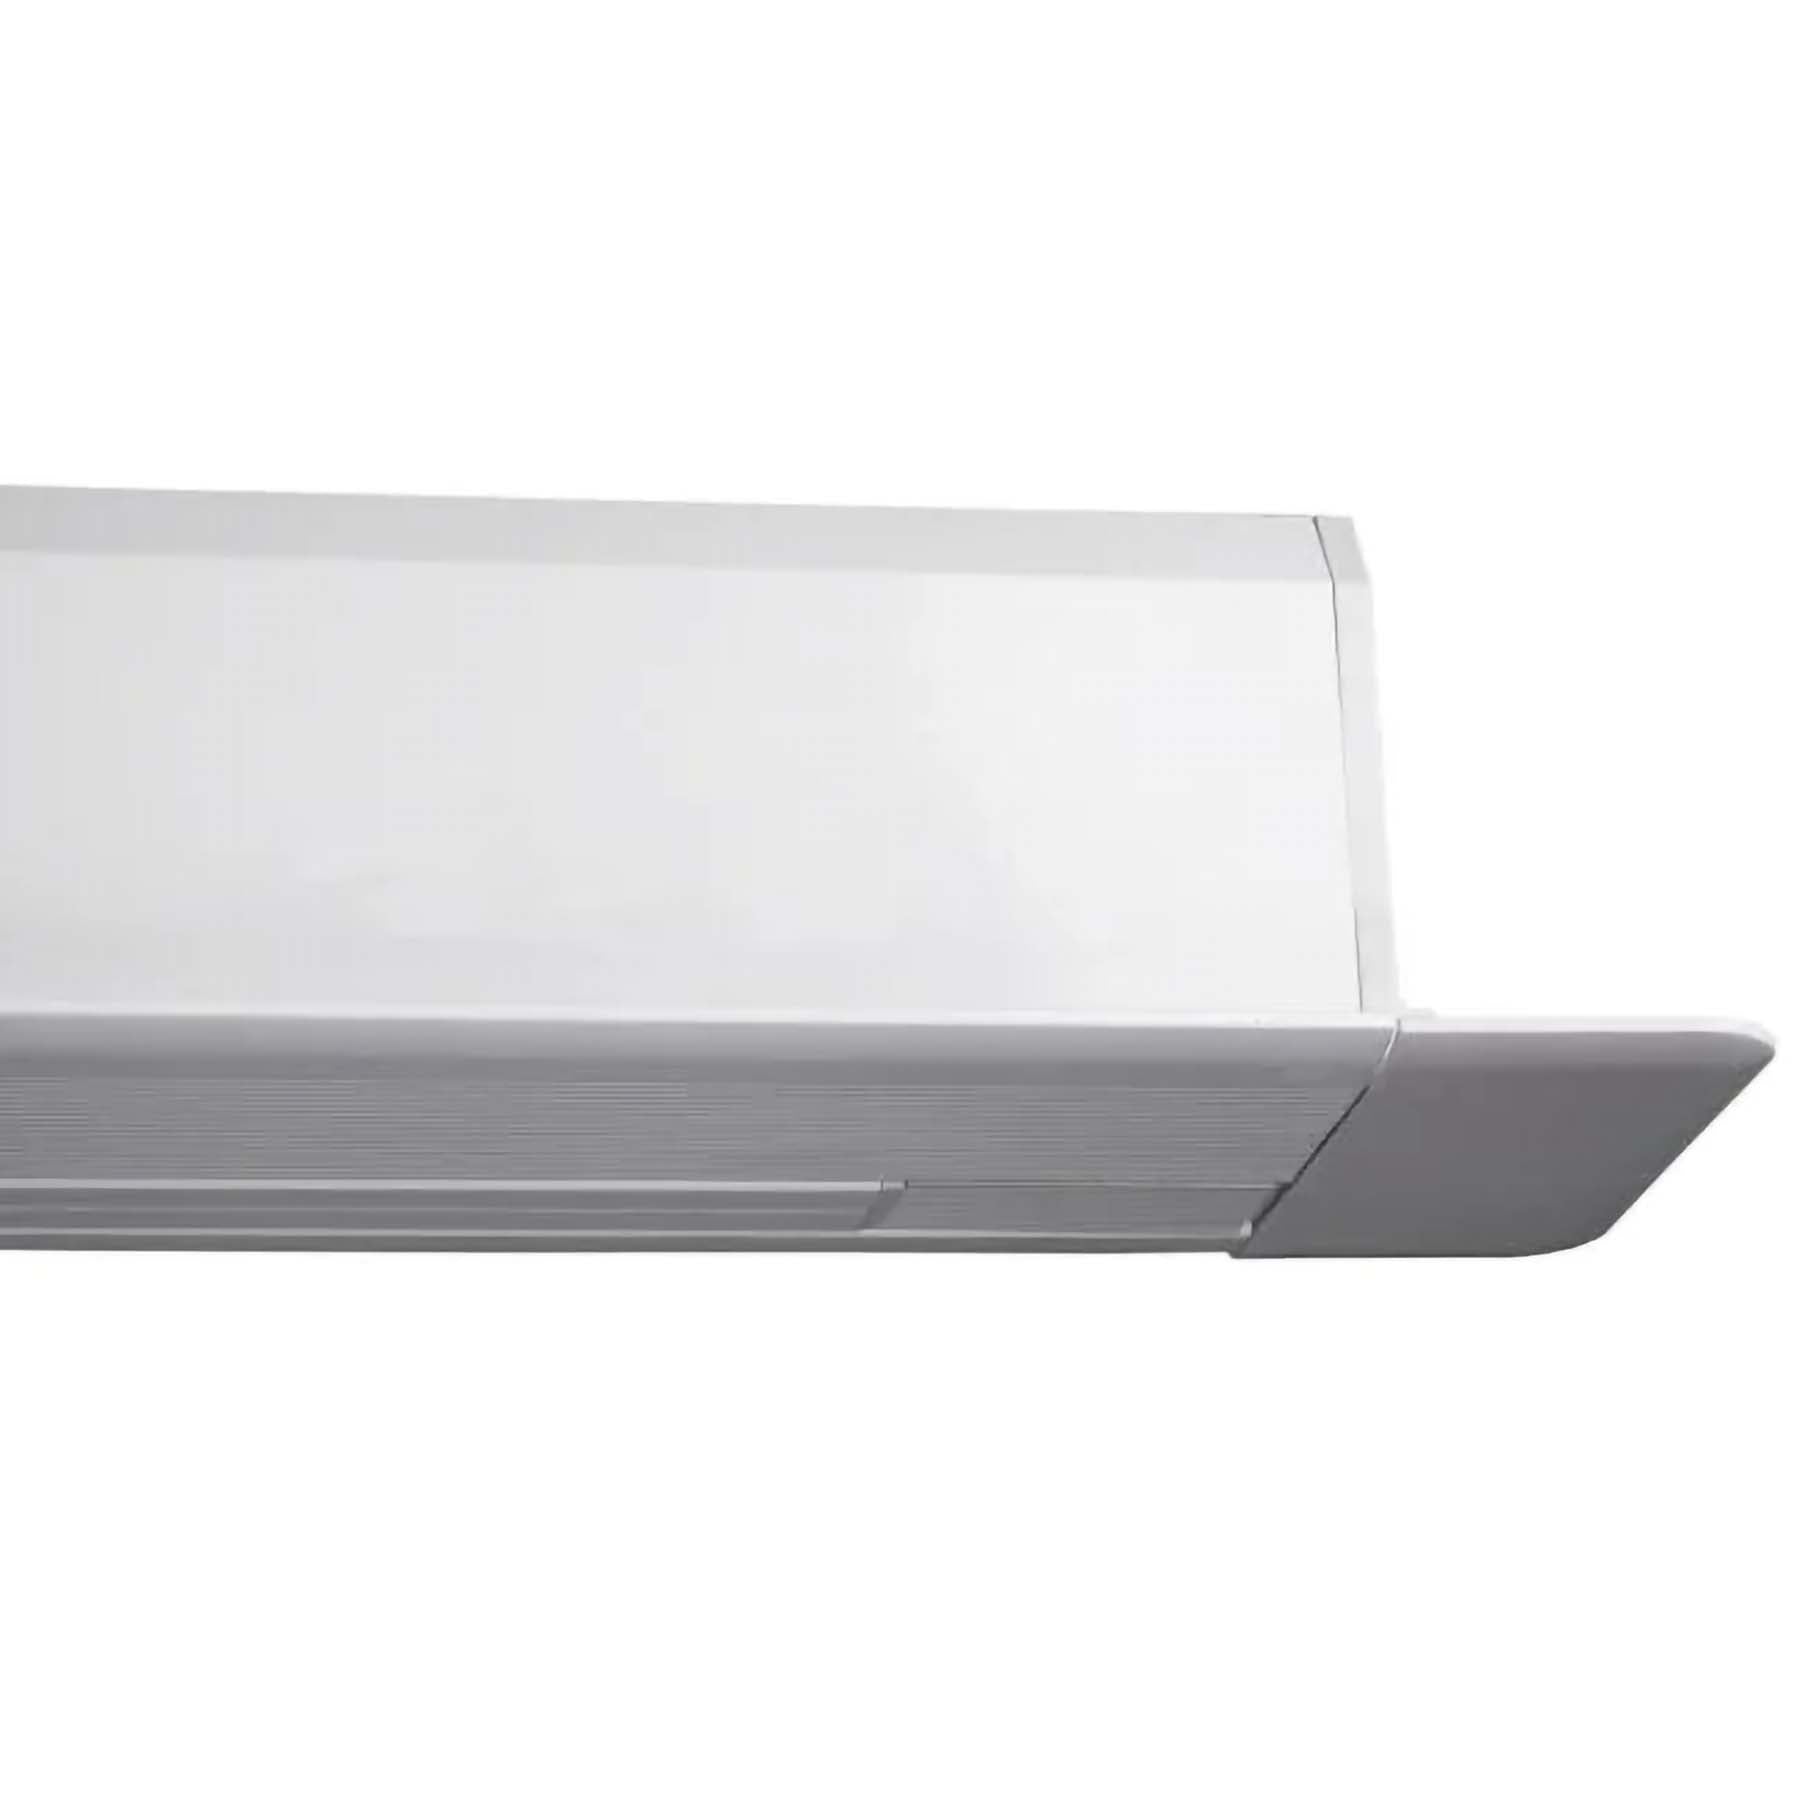 Encore Screens 16:9 CineMotion Stealth - Motorised In Ceiling with RF & Wall Control